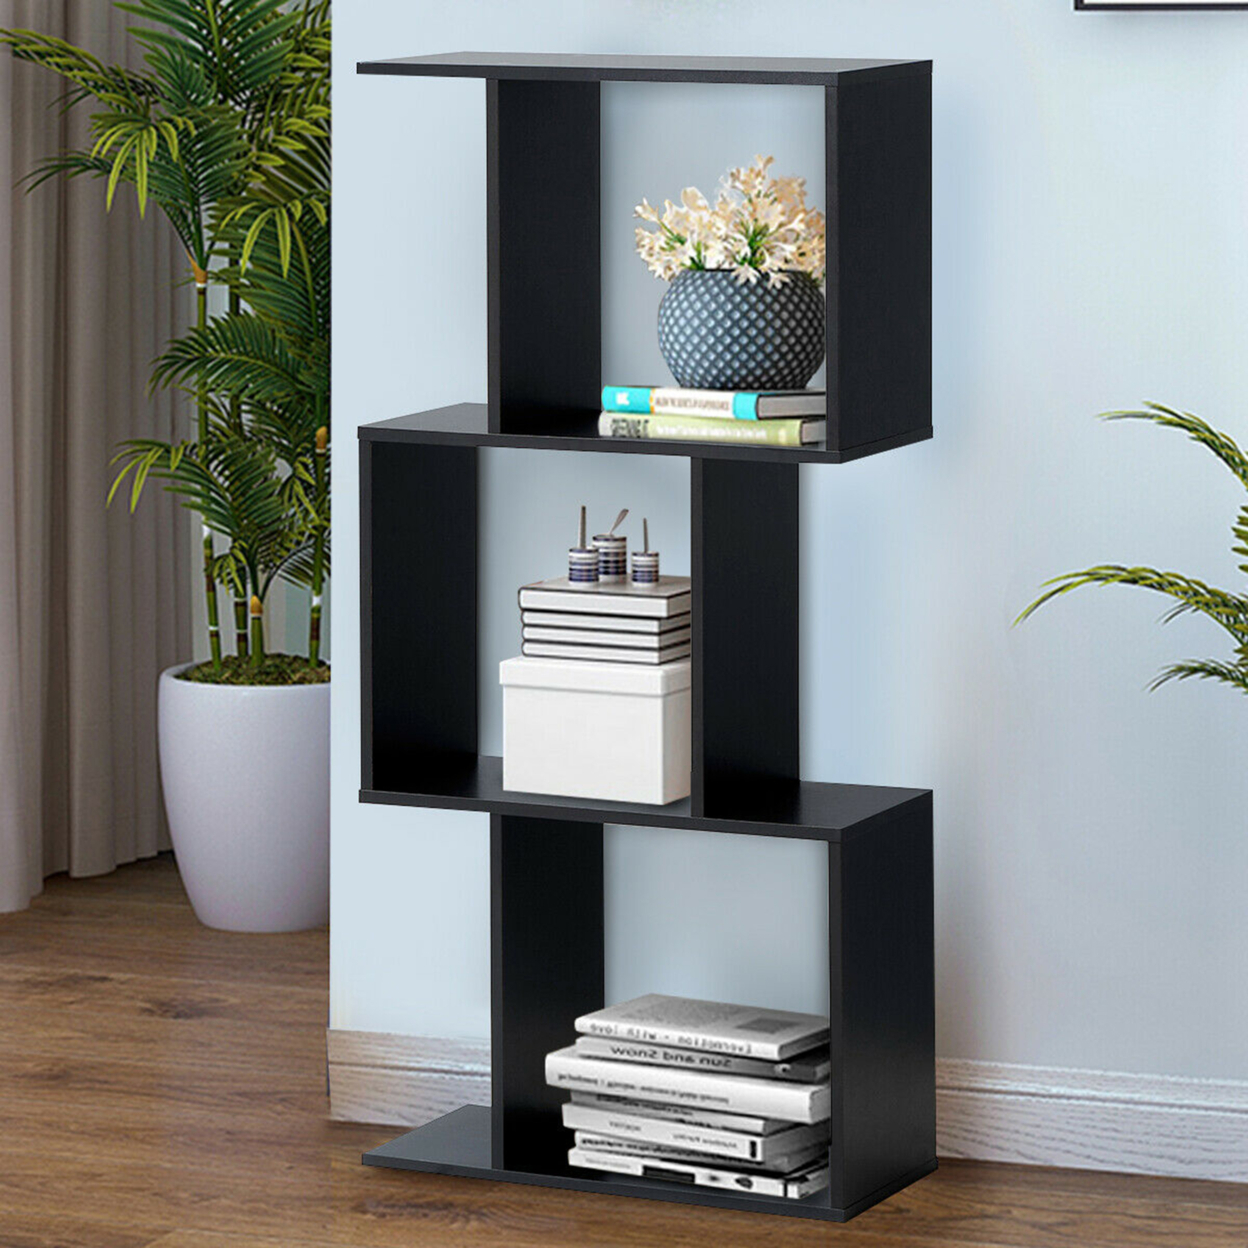 3-tier S-Shaped Bookcase Free Standing Storage Rack Wooden Display Decor Black